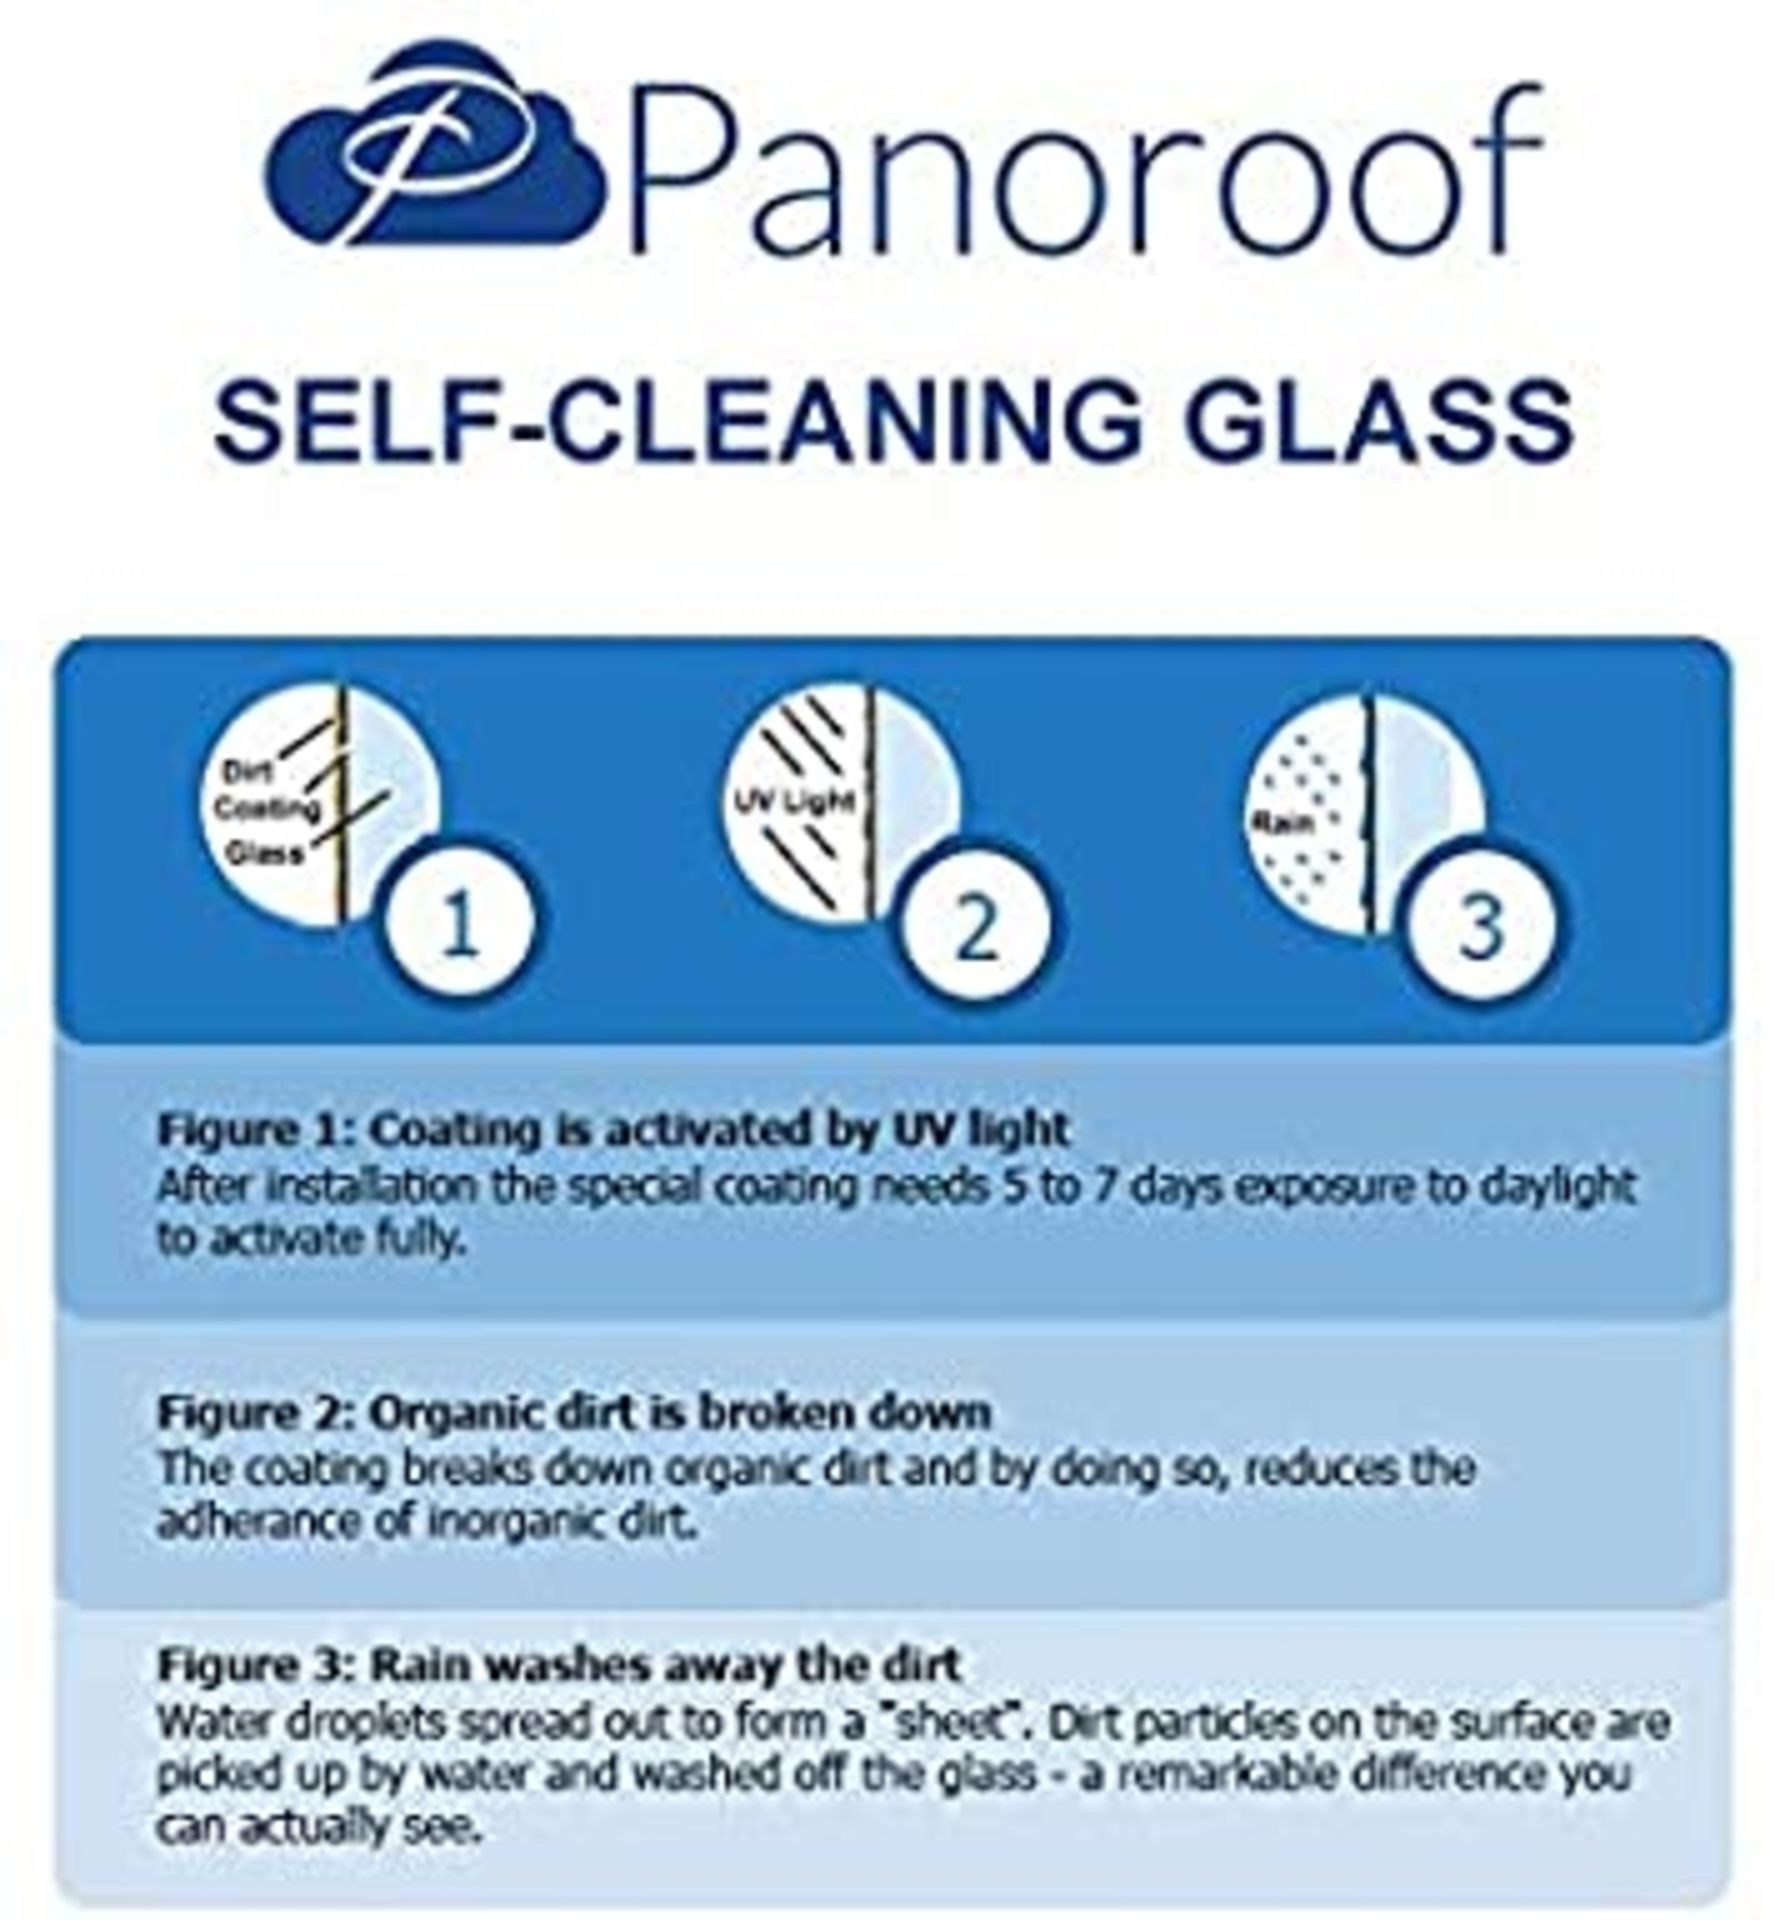 """Panoroof Triple Glazed Self Cleaning 1000x1500mm (inside Size Visable glass area) Seamless - Image 6 of 6